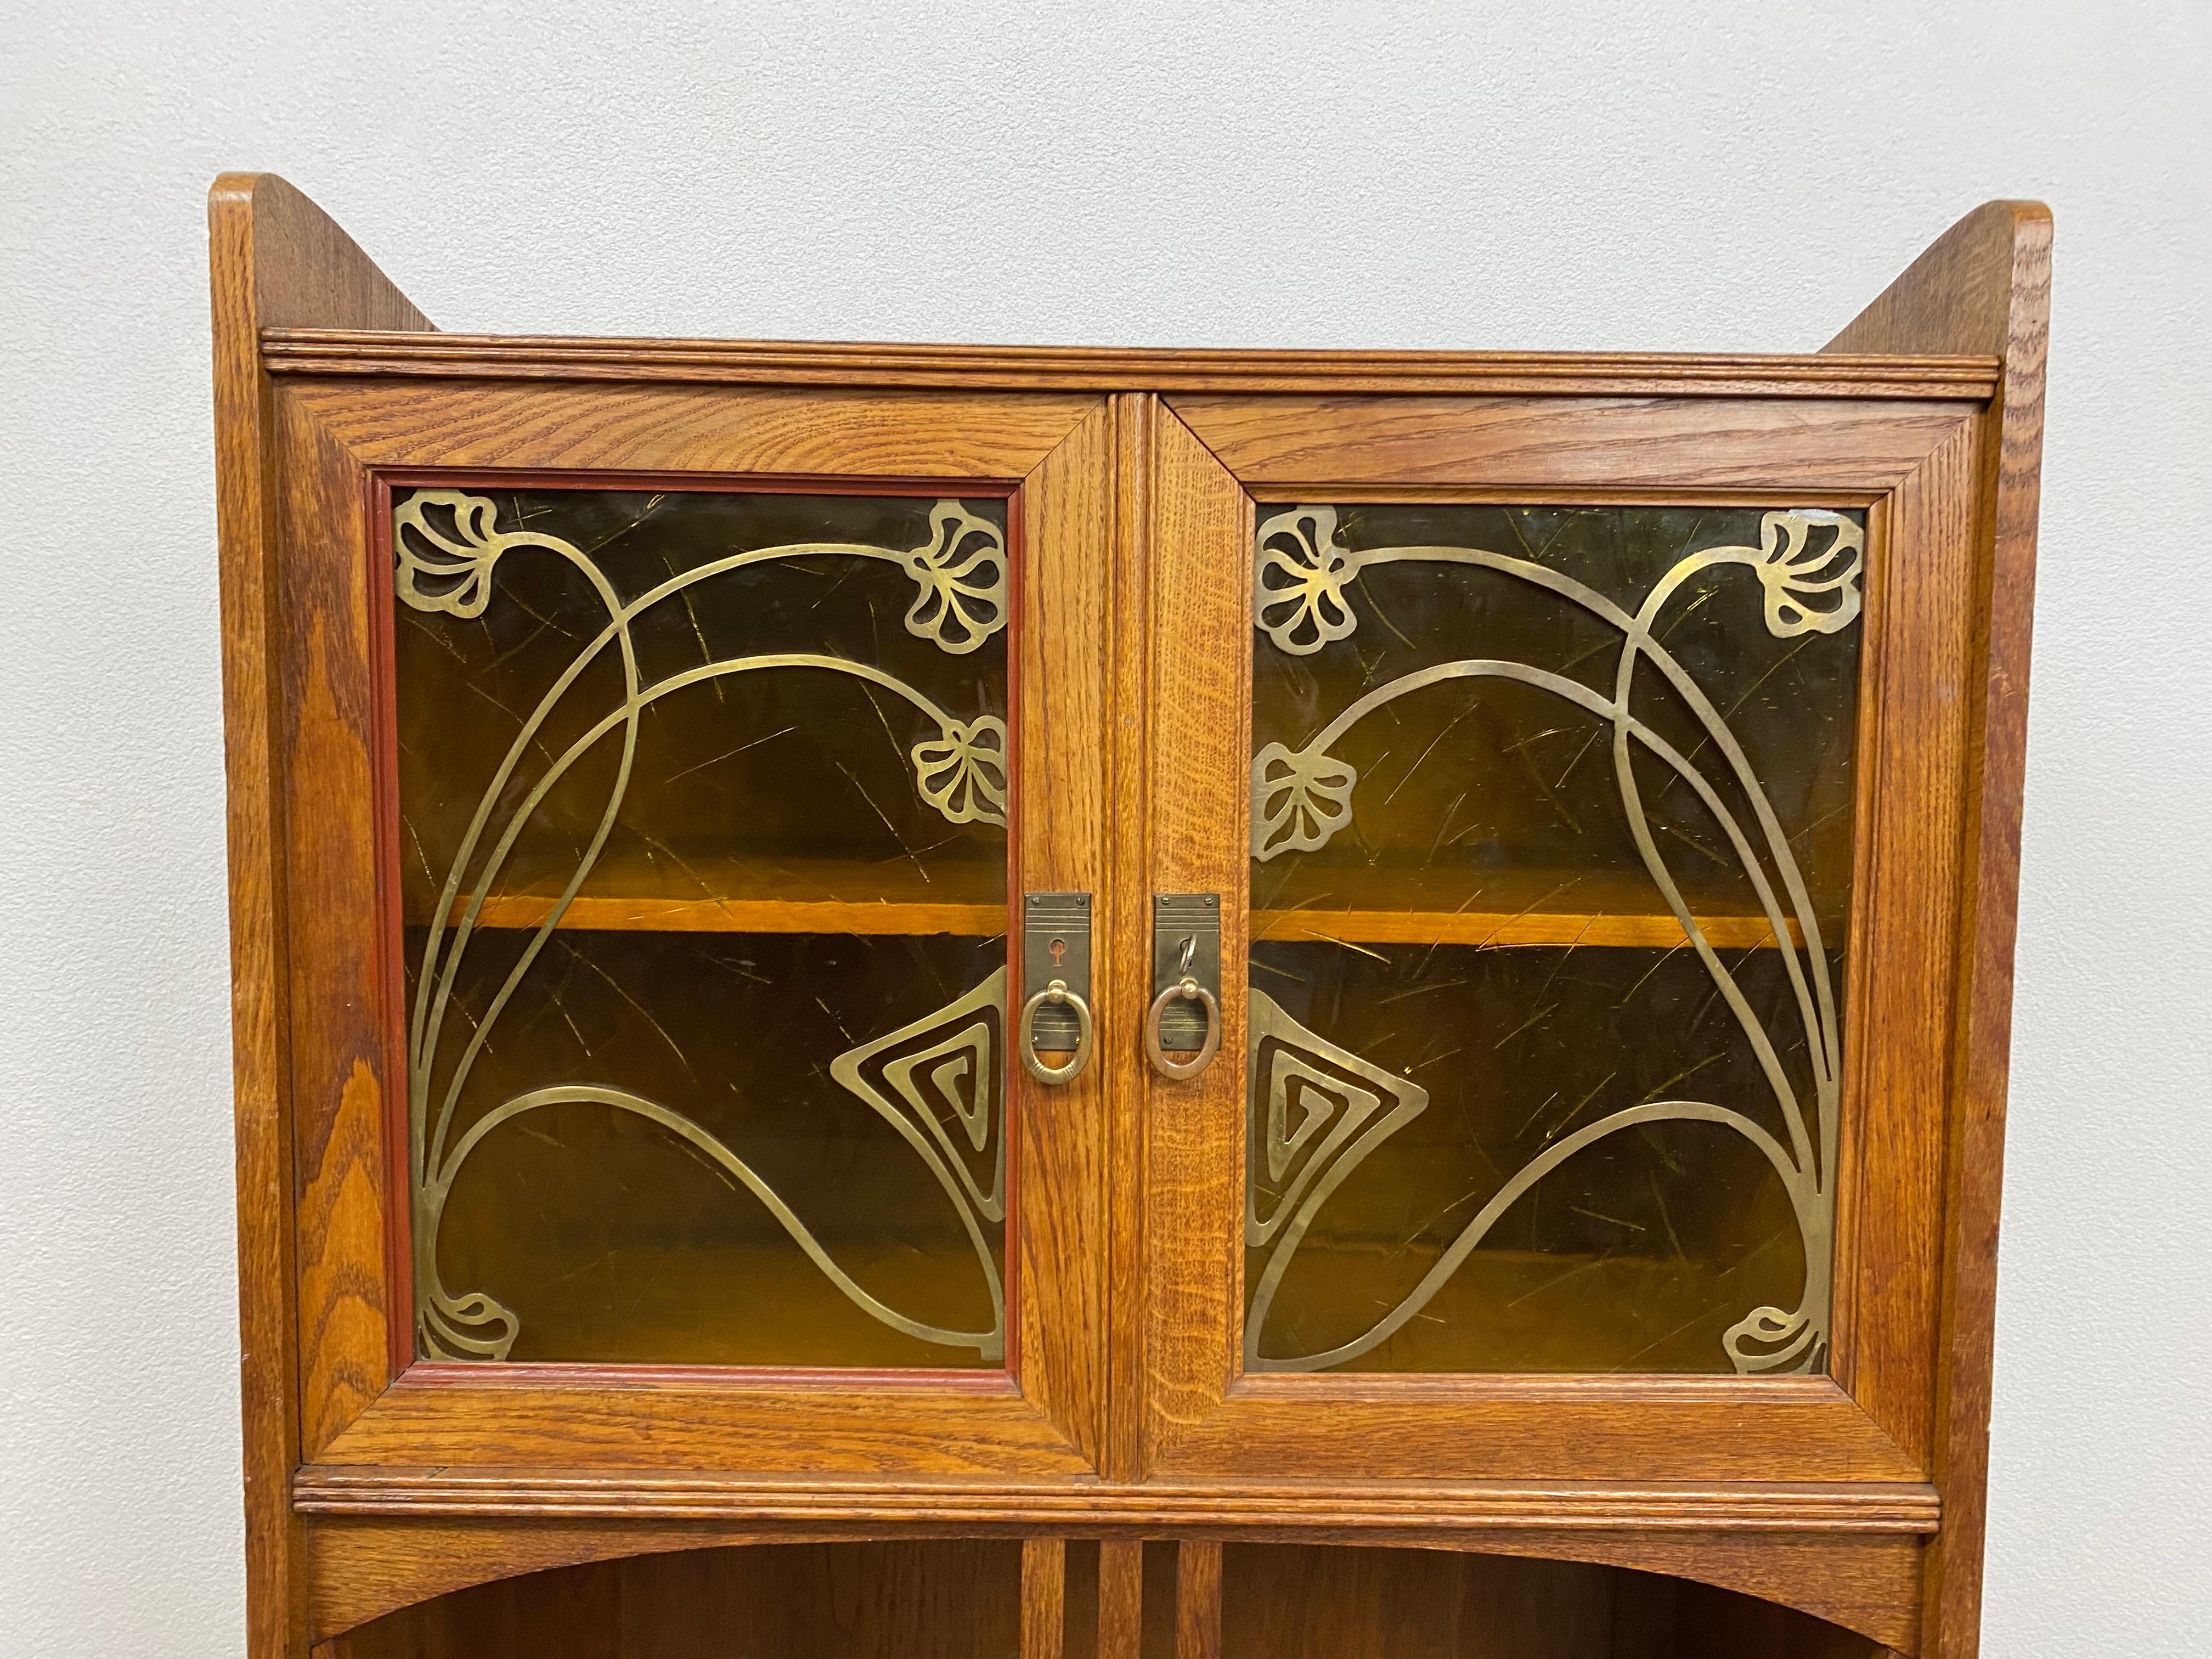 Art nouveau bookcase with brass fittings in excellent original condition.